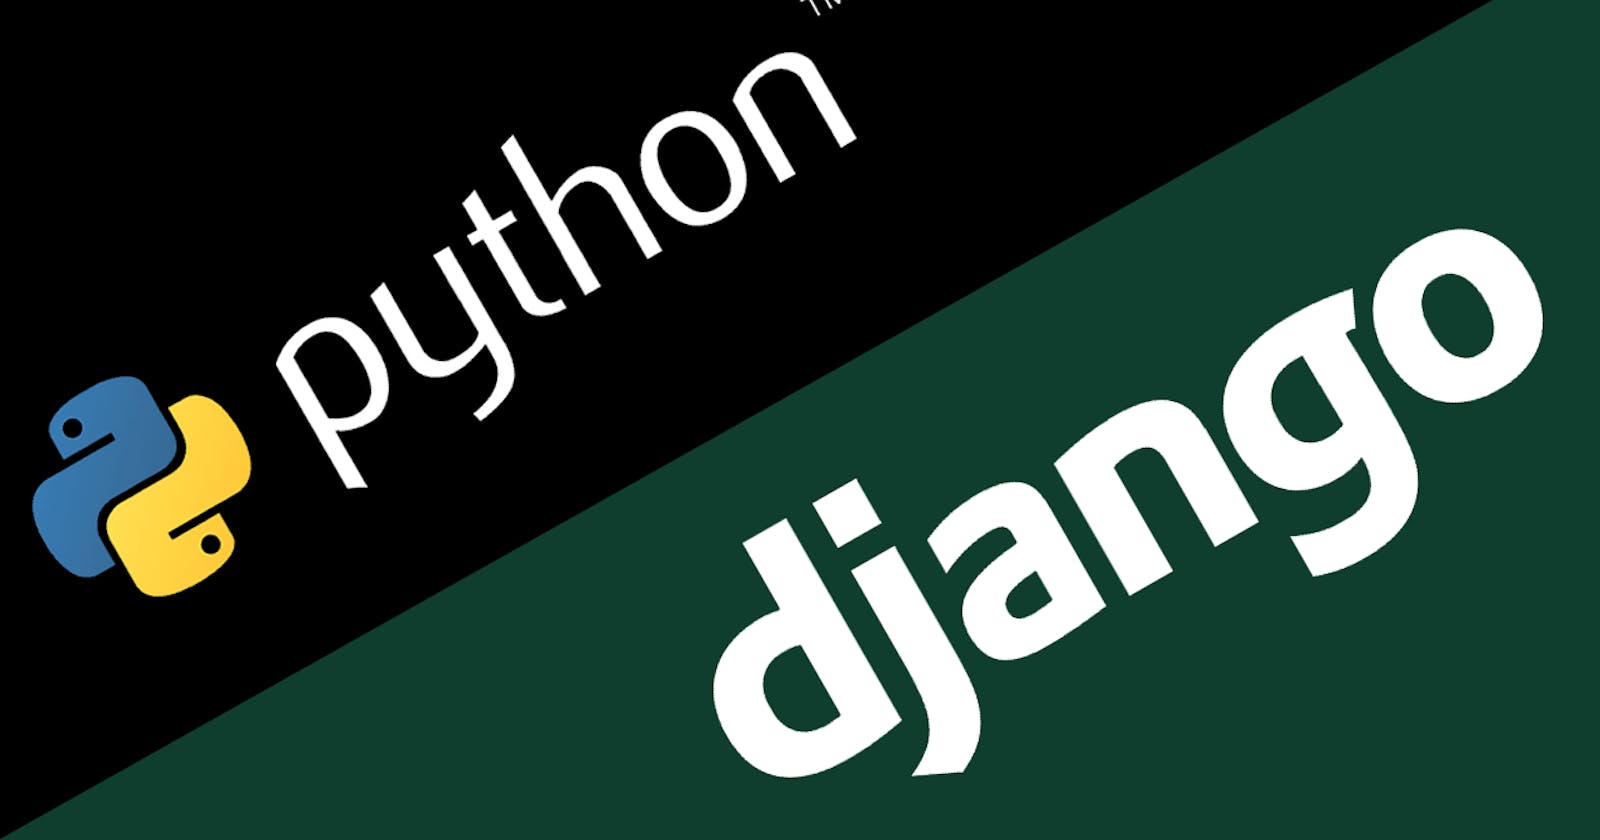 Auto complete foreignKey in Django